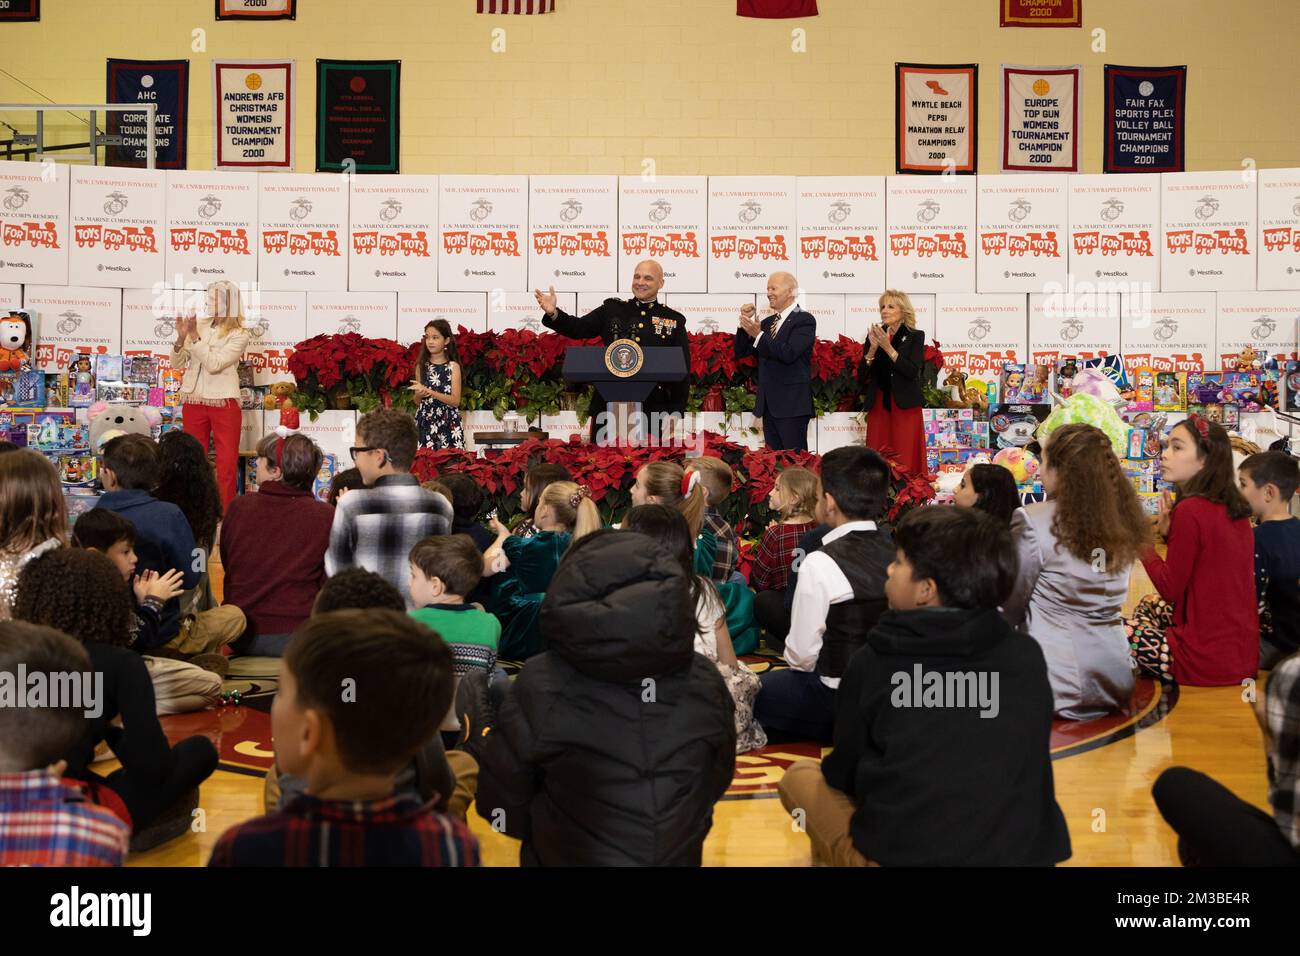 Arlington, United States. 12 December, 2022. U.S. Marine Corps Reserve General David Bellon, center,  welcomes President Joe Biden and First Lady Jill Biden, right, to the 75th anniversary Toys for Tots sorting at Joint Base Myer-Henderson Hall, December 12, 2022 in Arlington, Virginia.  Credit: Sgt. Ellen Schaaf/US Marine Corps/Alamy Live News Stock Photo